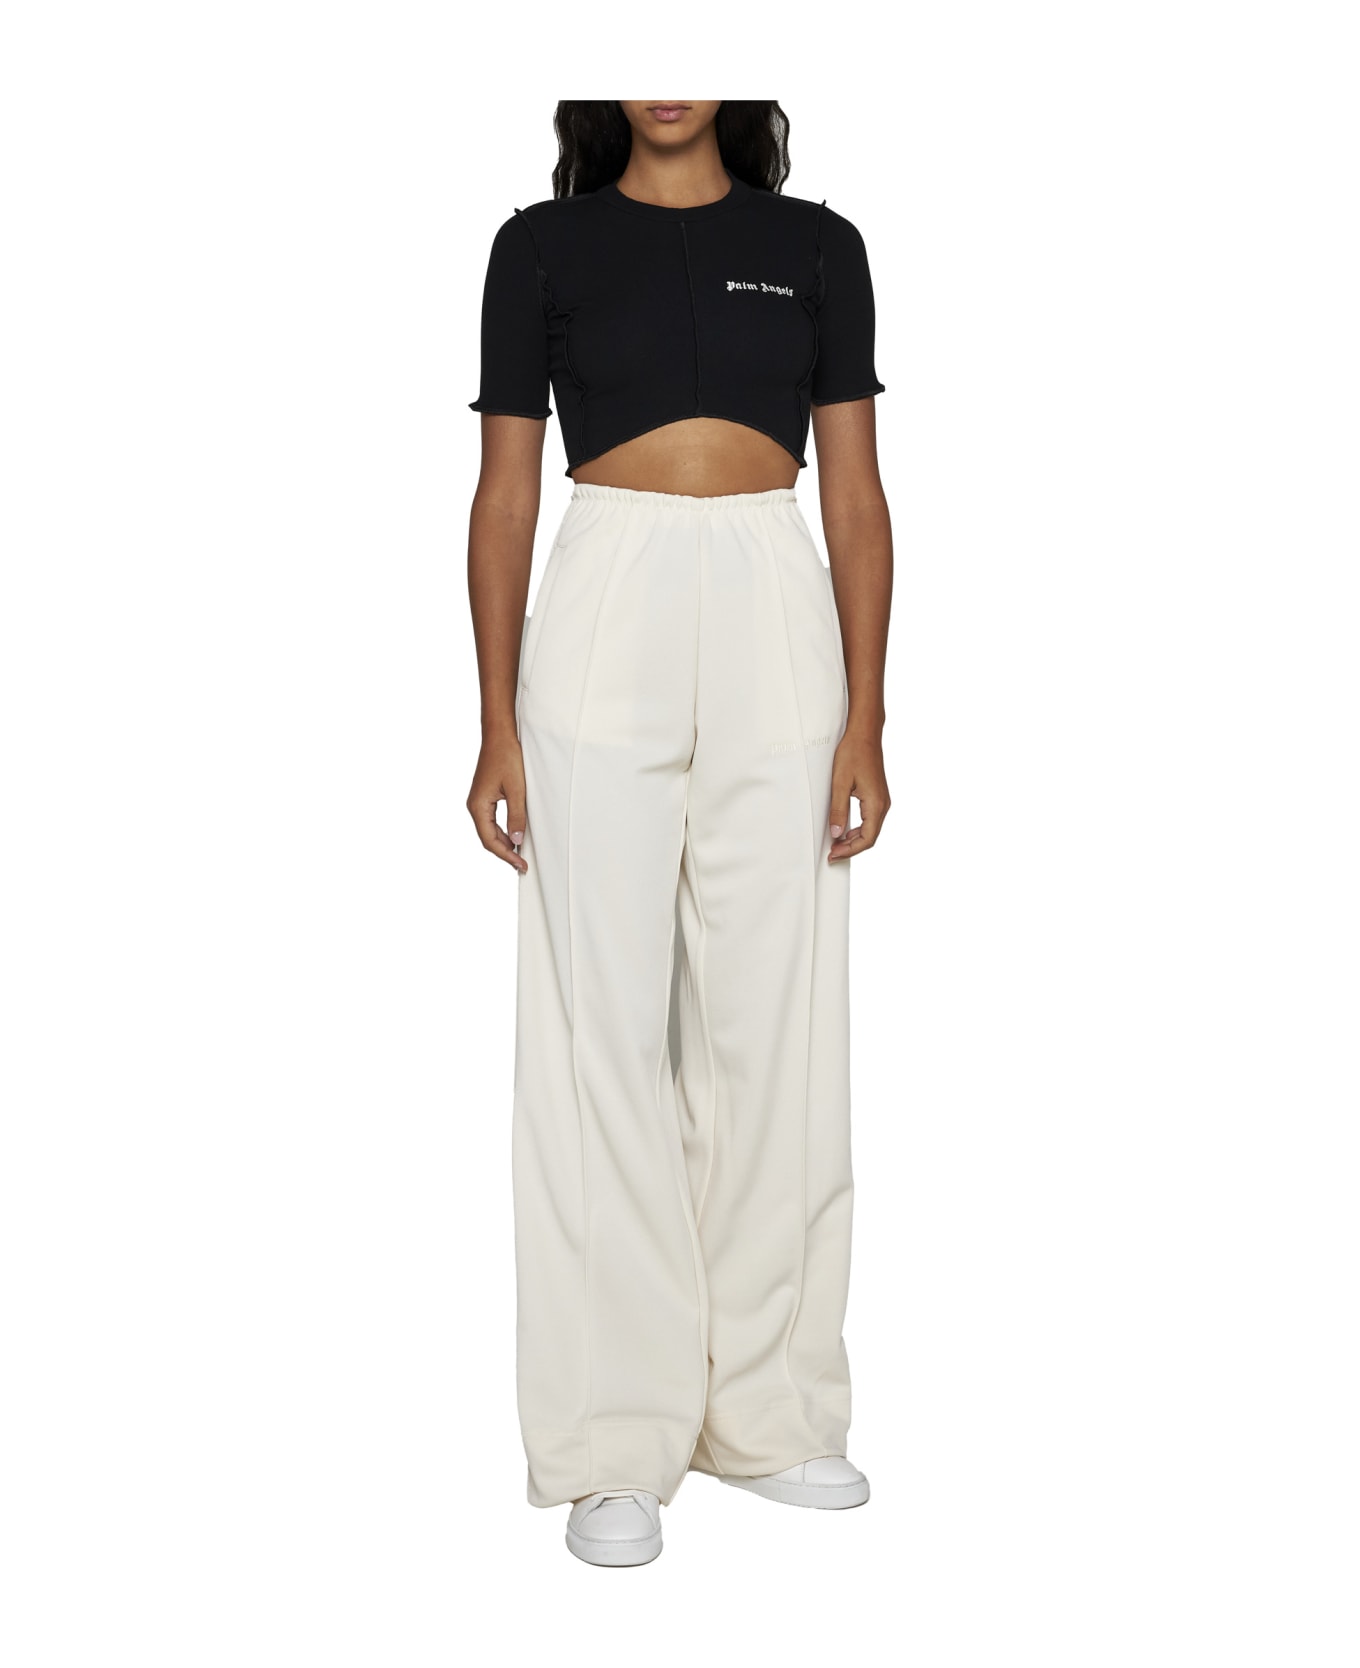 Palm Angels Logo Cropped Top - Black off white